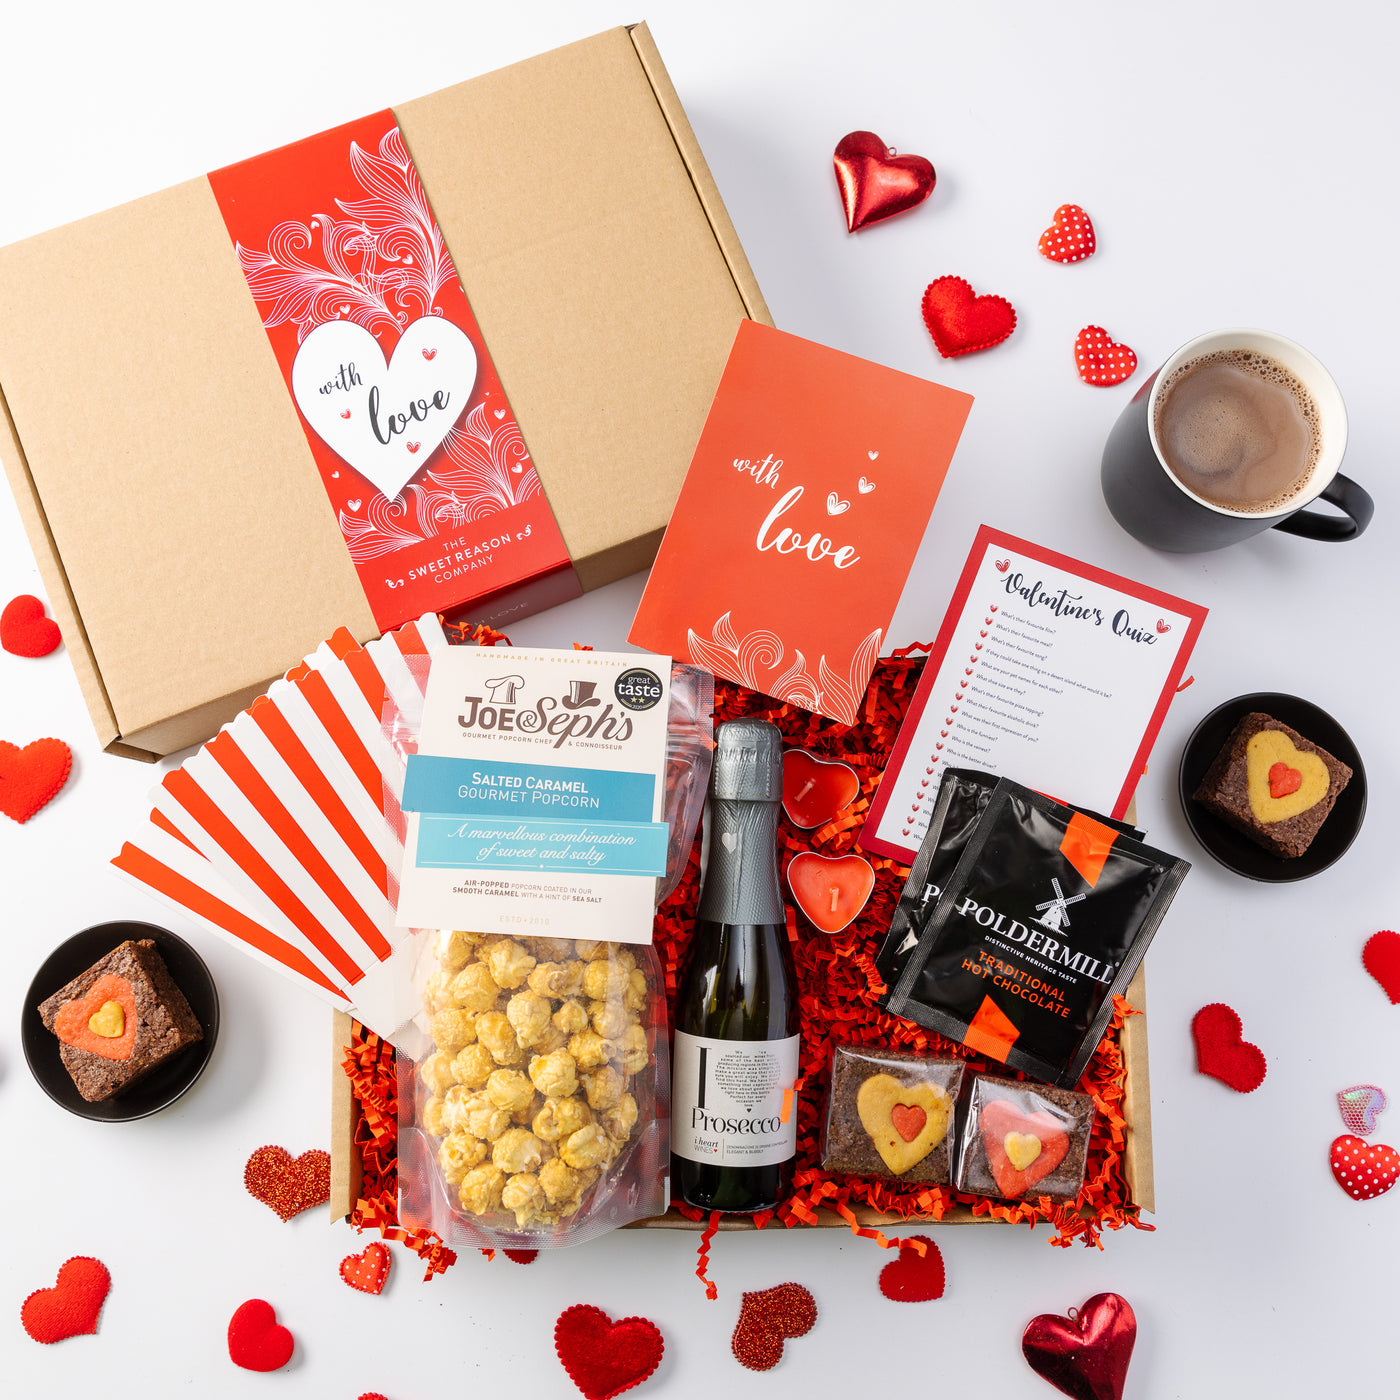 'With Love' Popcorn, Chocolate and Prosecco Valentine's Gift Box